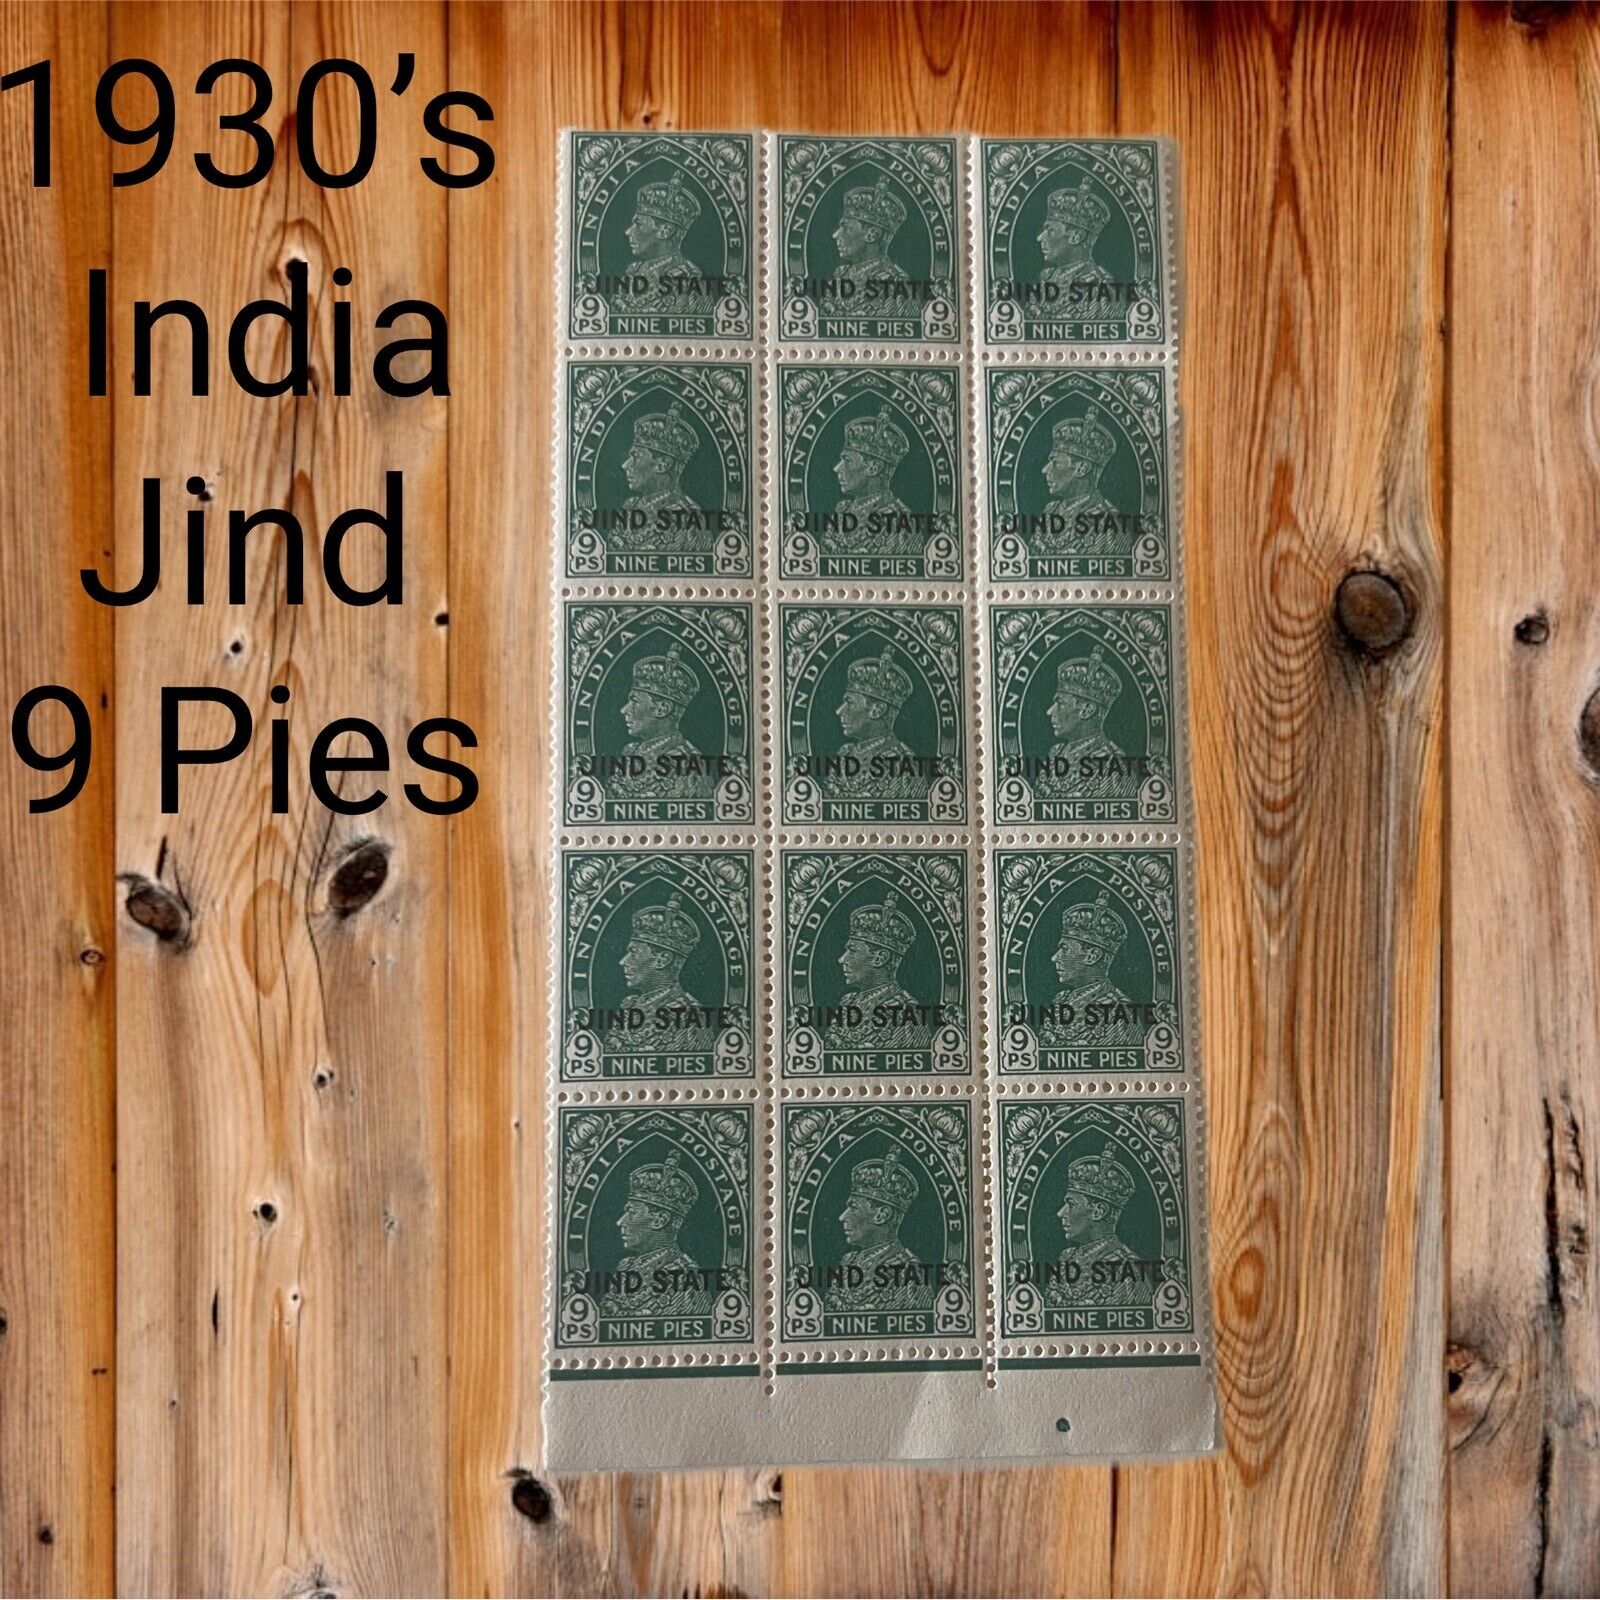 1930’s INDIA JIND State 9 PIES BLOCK OF 15 Postage Stamps SJXX-497